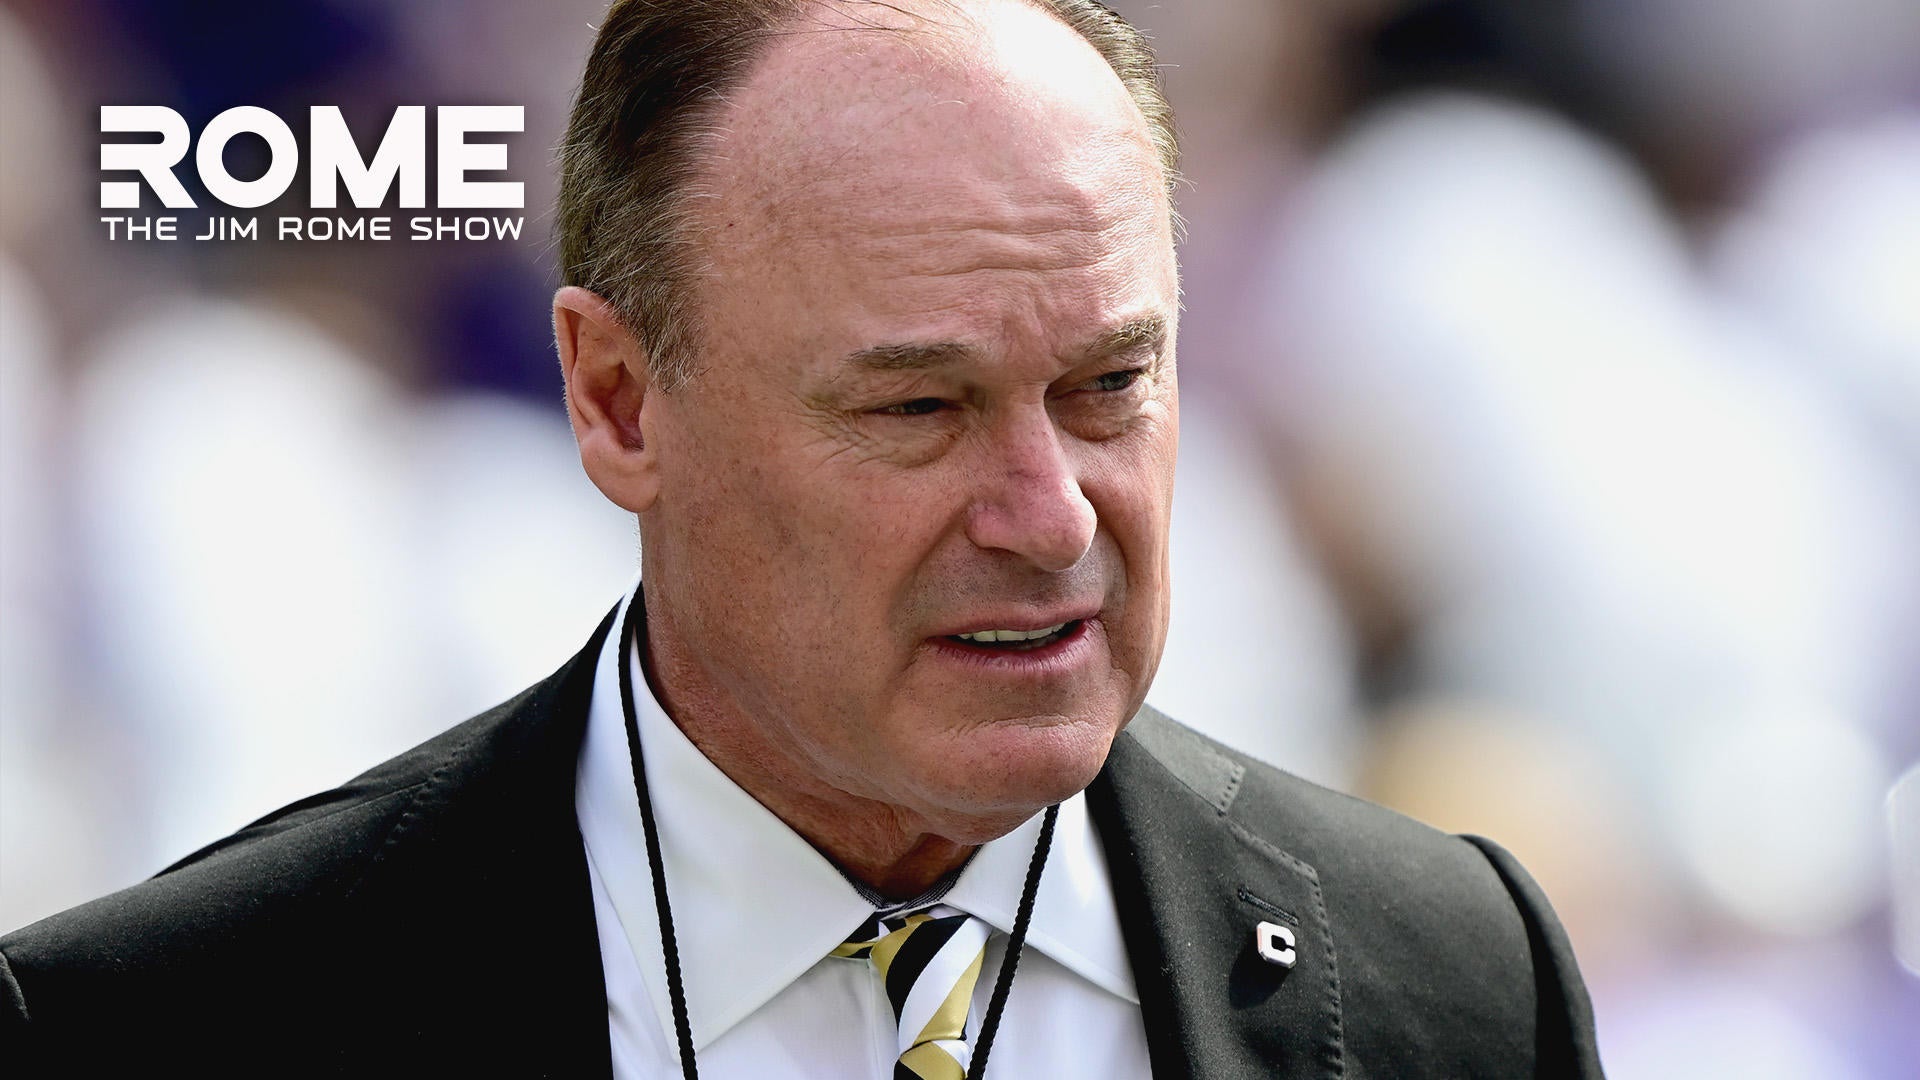 The Jim Rome Show: Rick George On Hiring Coach Prime and His